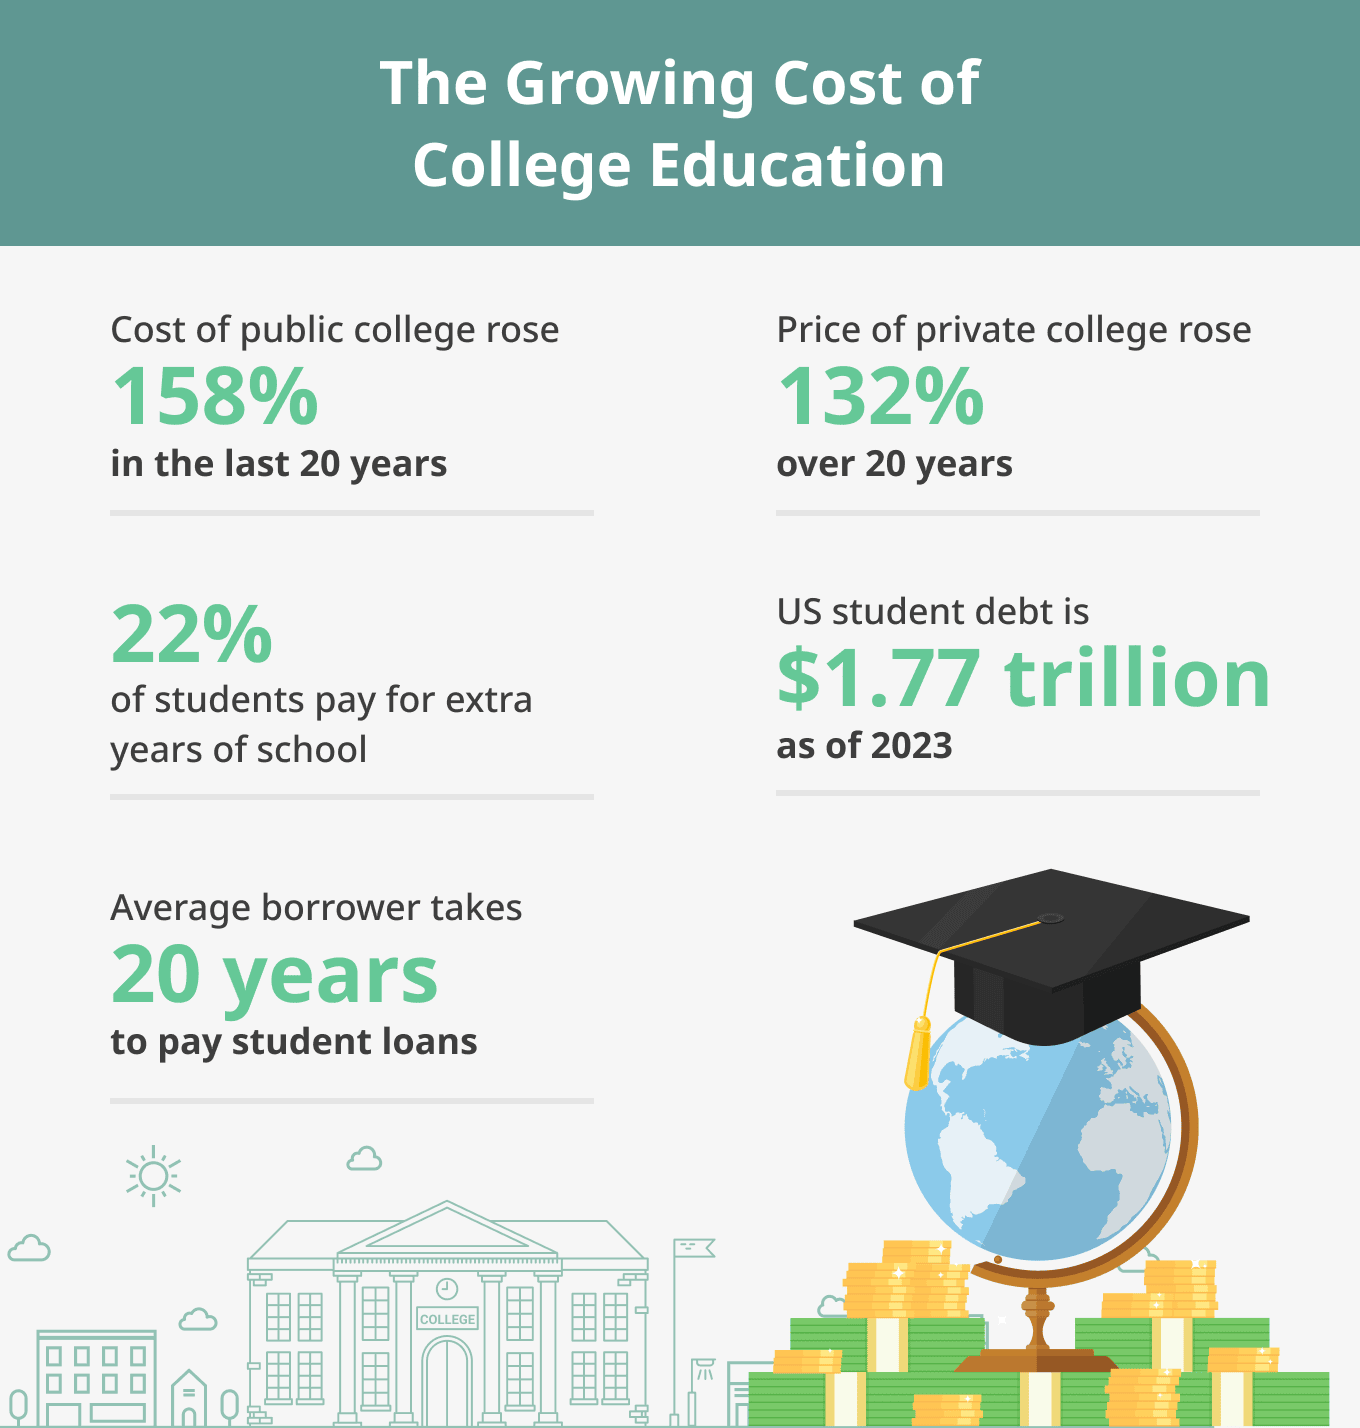 An infographic showing the rising cost of college education